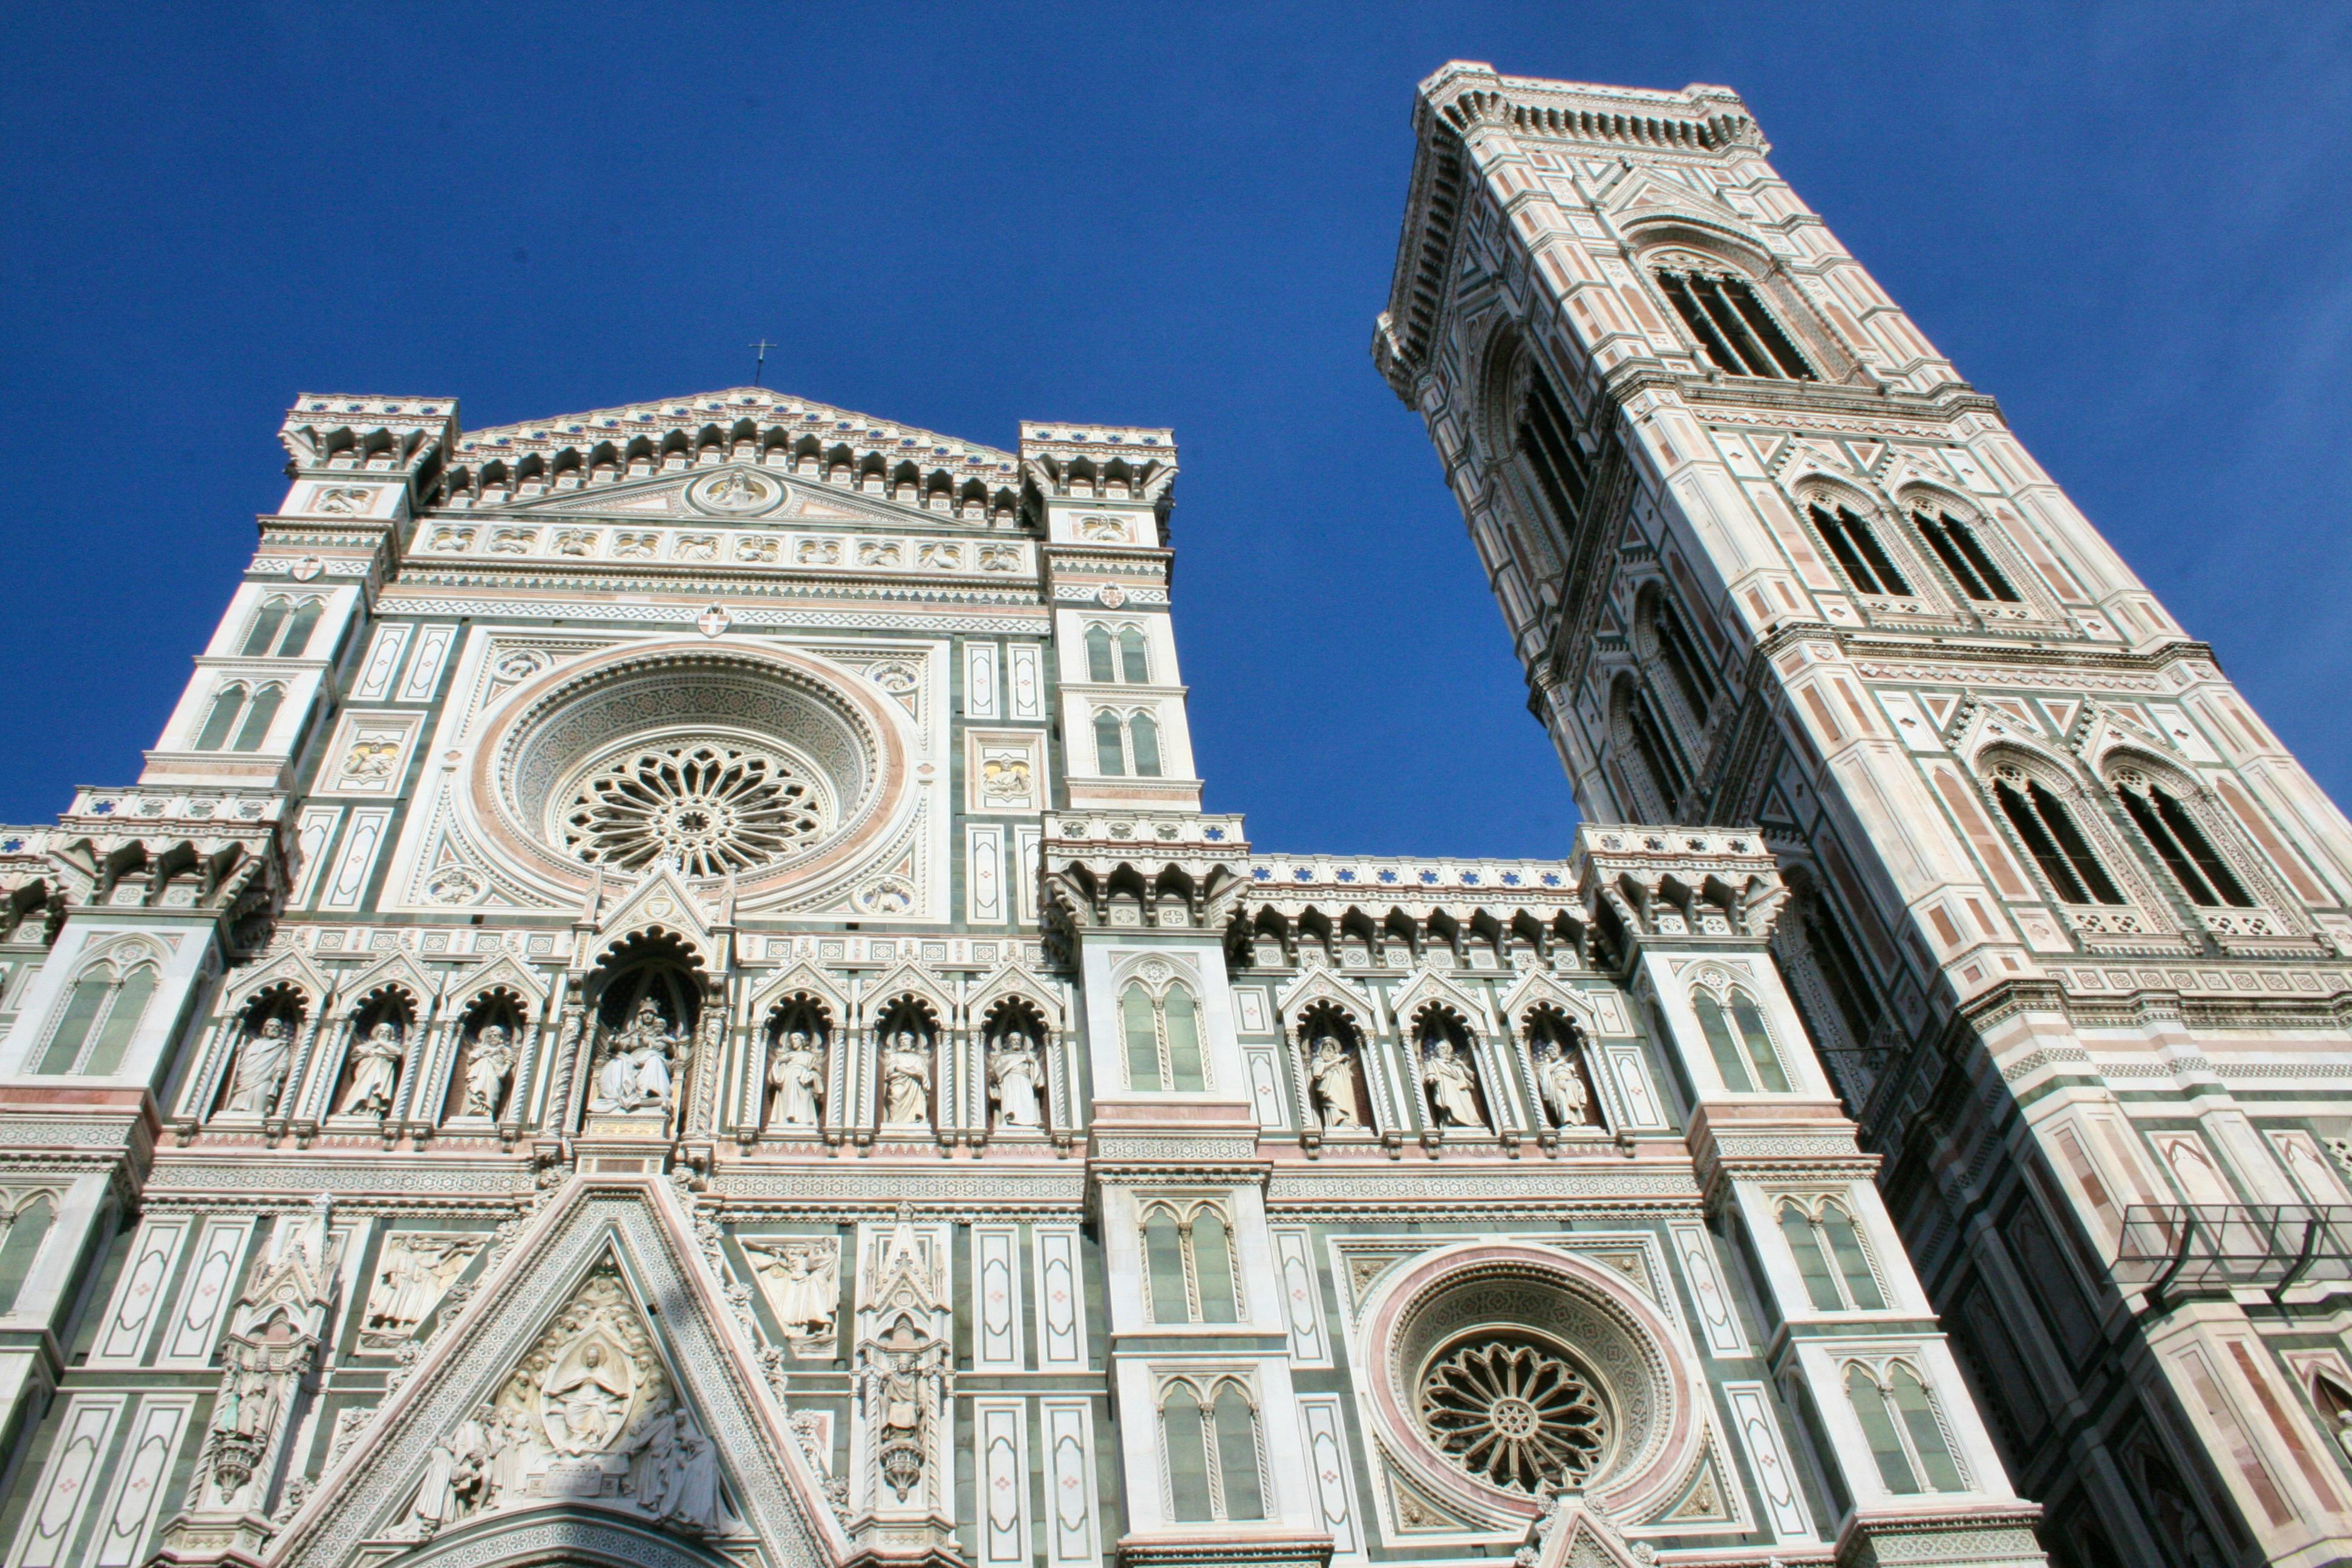 The Duomo in Florence, the Cathedral of Santa Maria del Fiore in Florence,  Italy